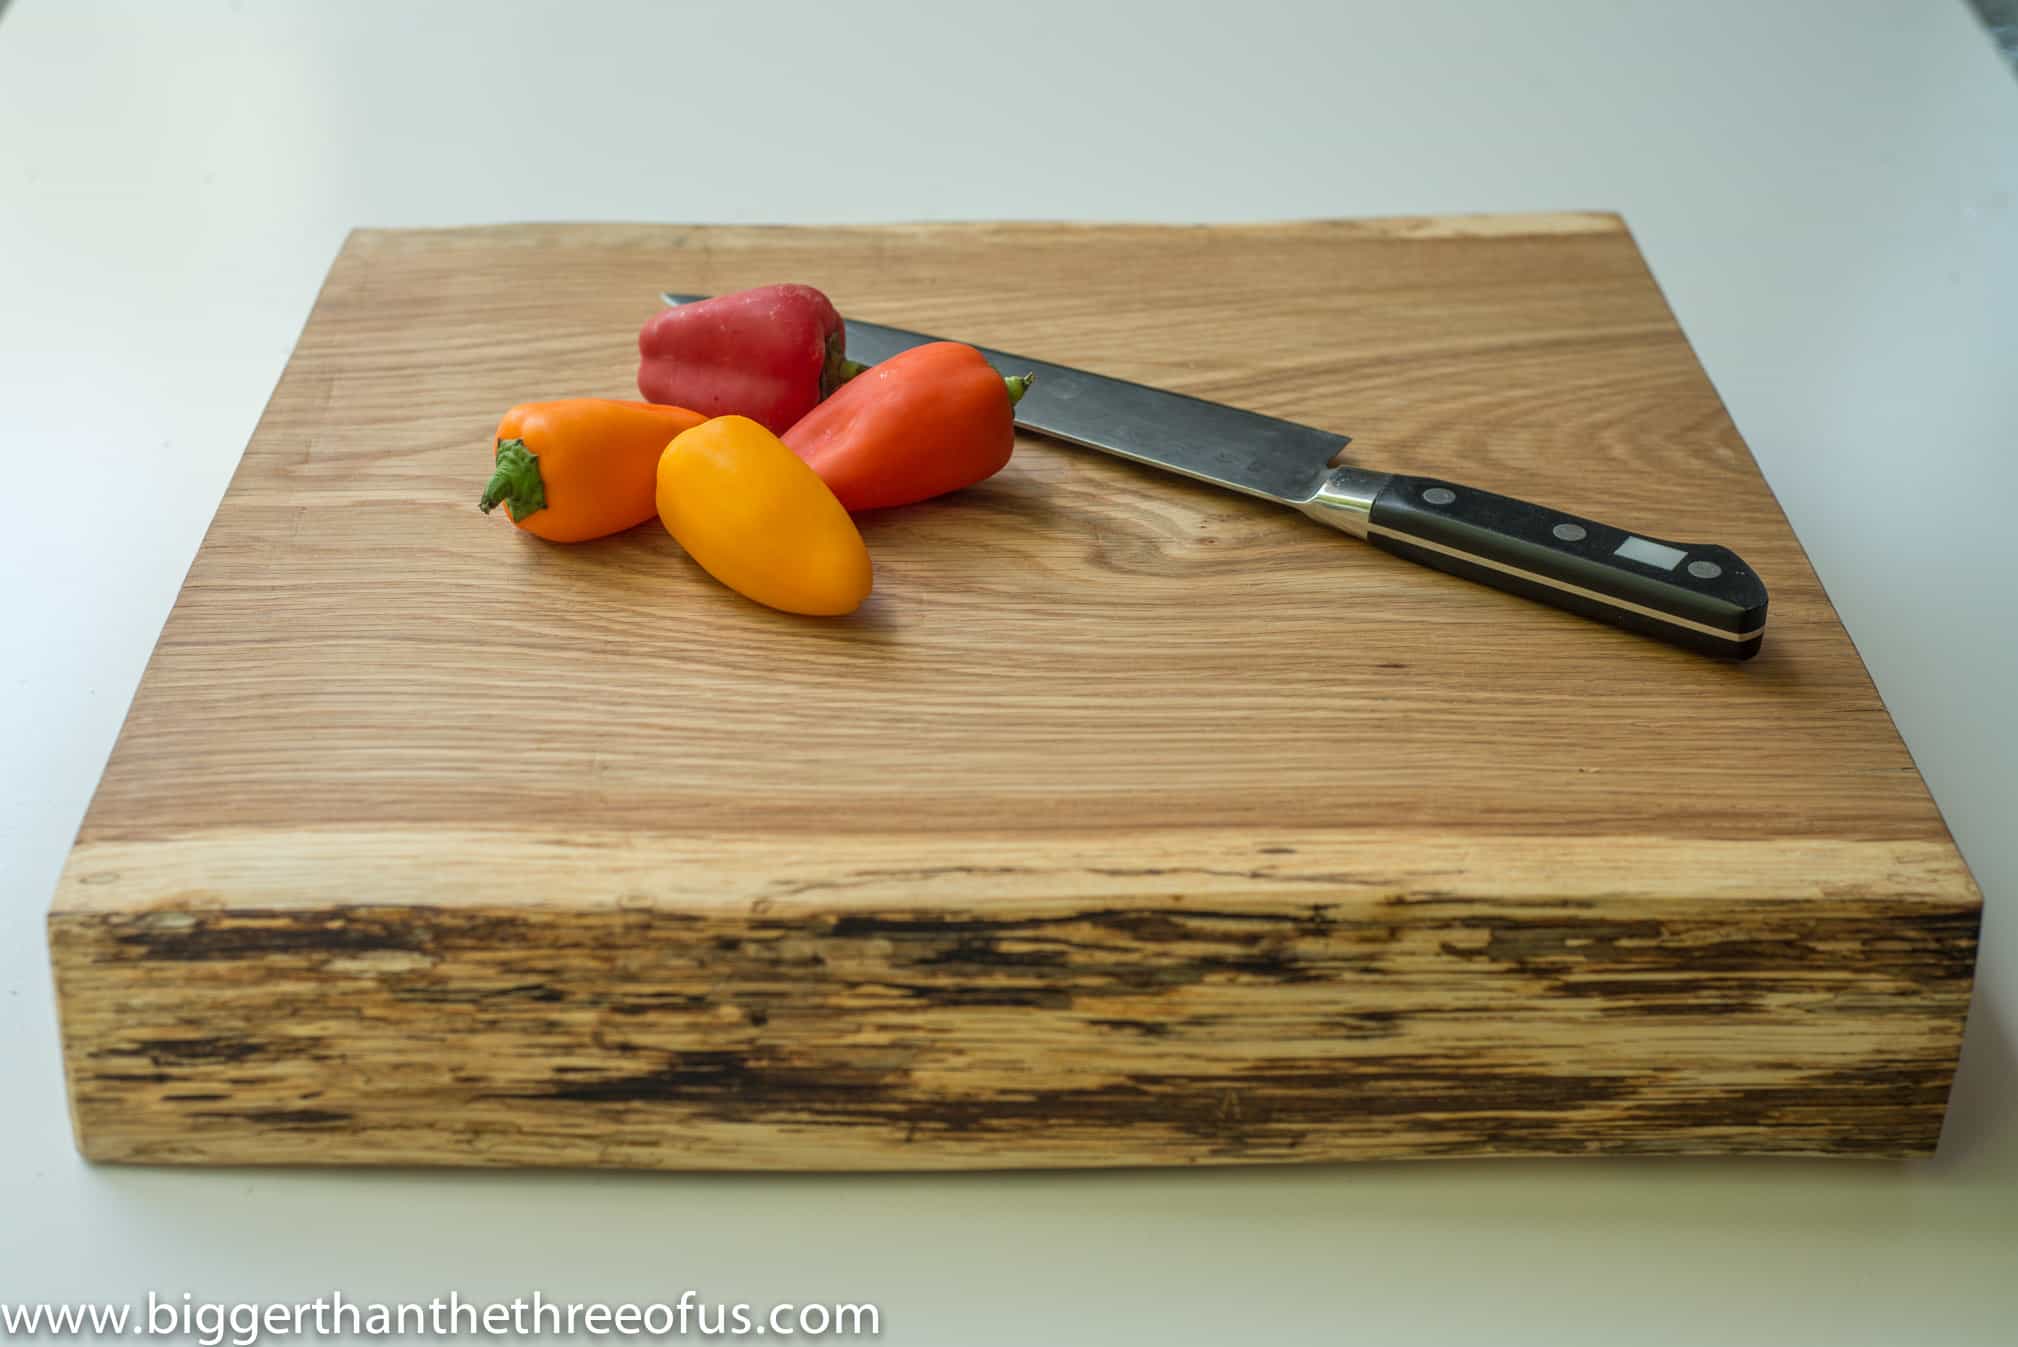 How to Make a Cutting Board out of a Tree Stump